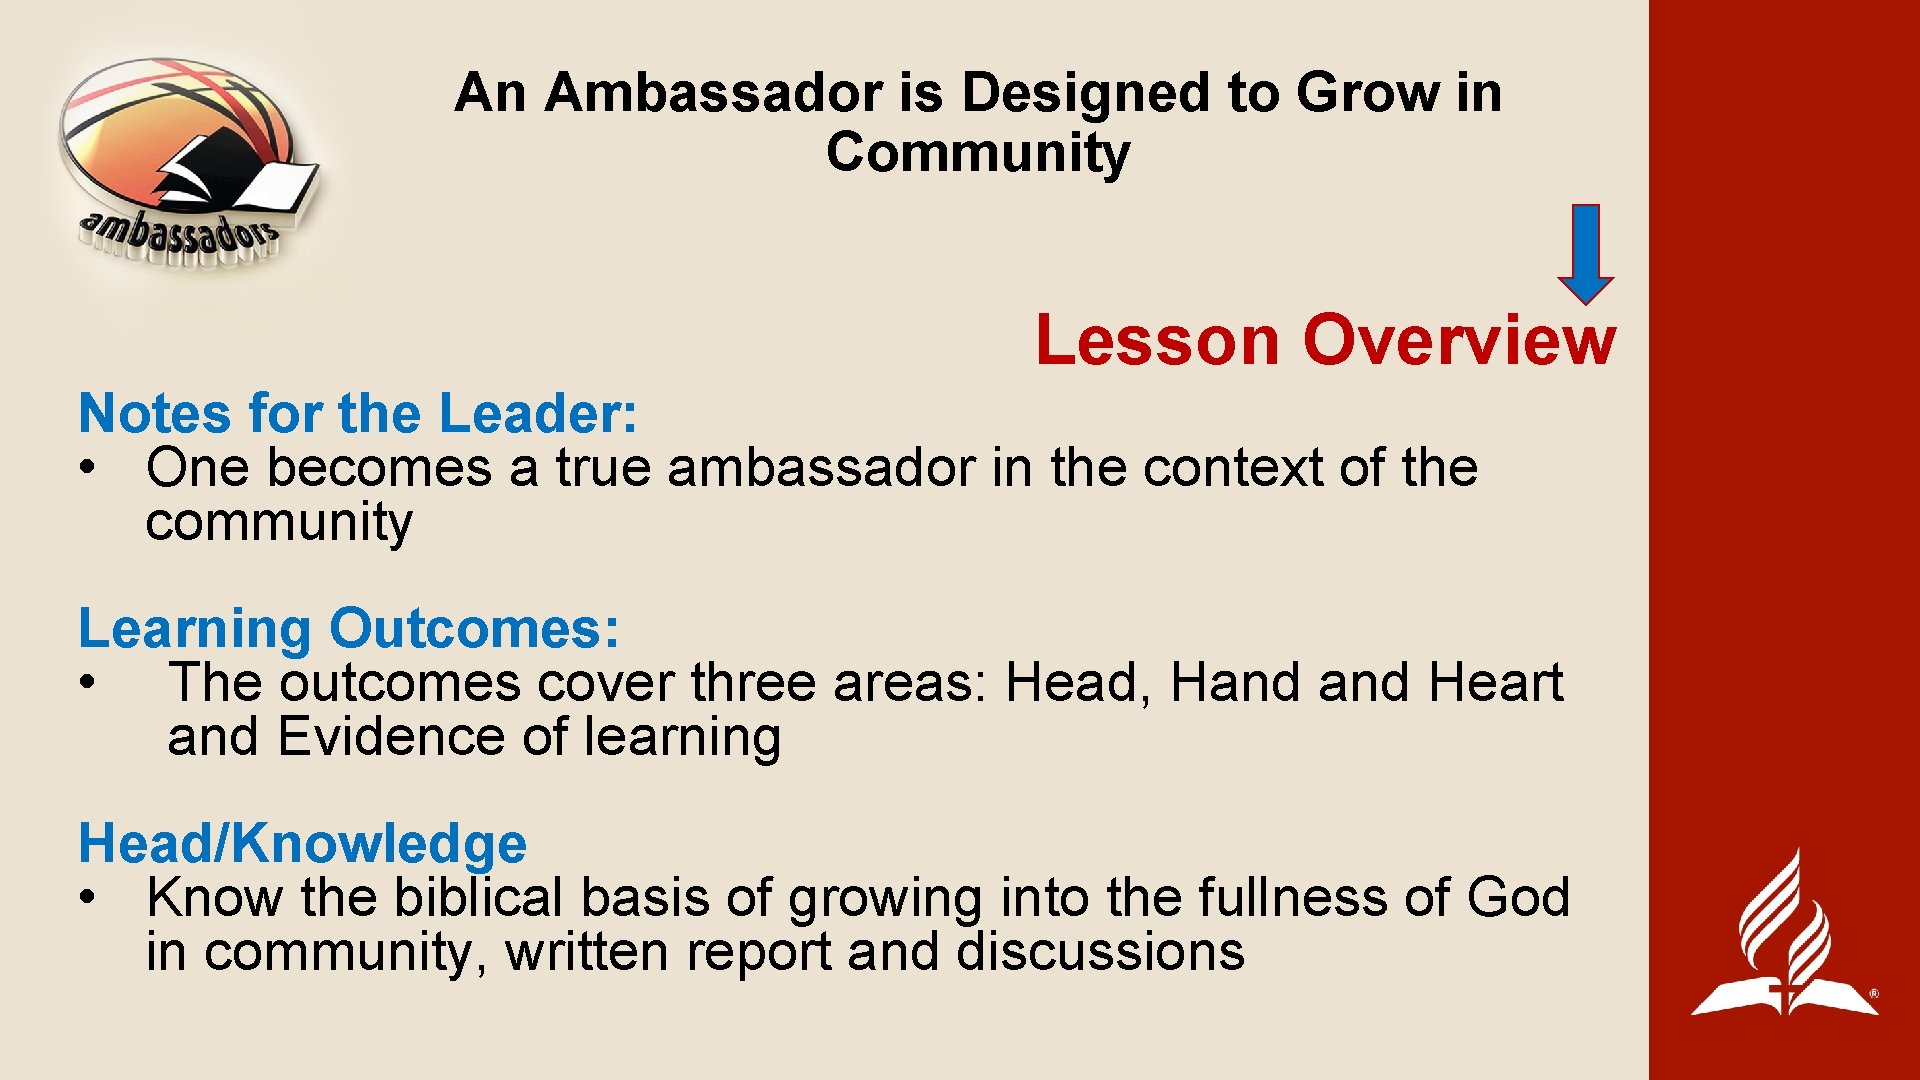 An Ambassador is Designed to Grow in Community Lesson Overview Notes for the Leader: